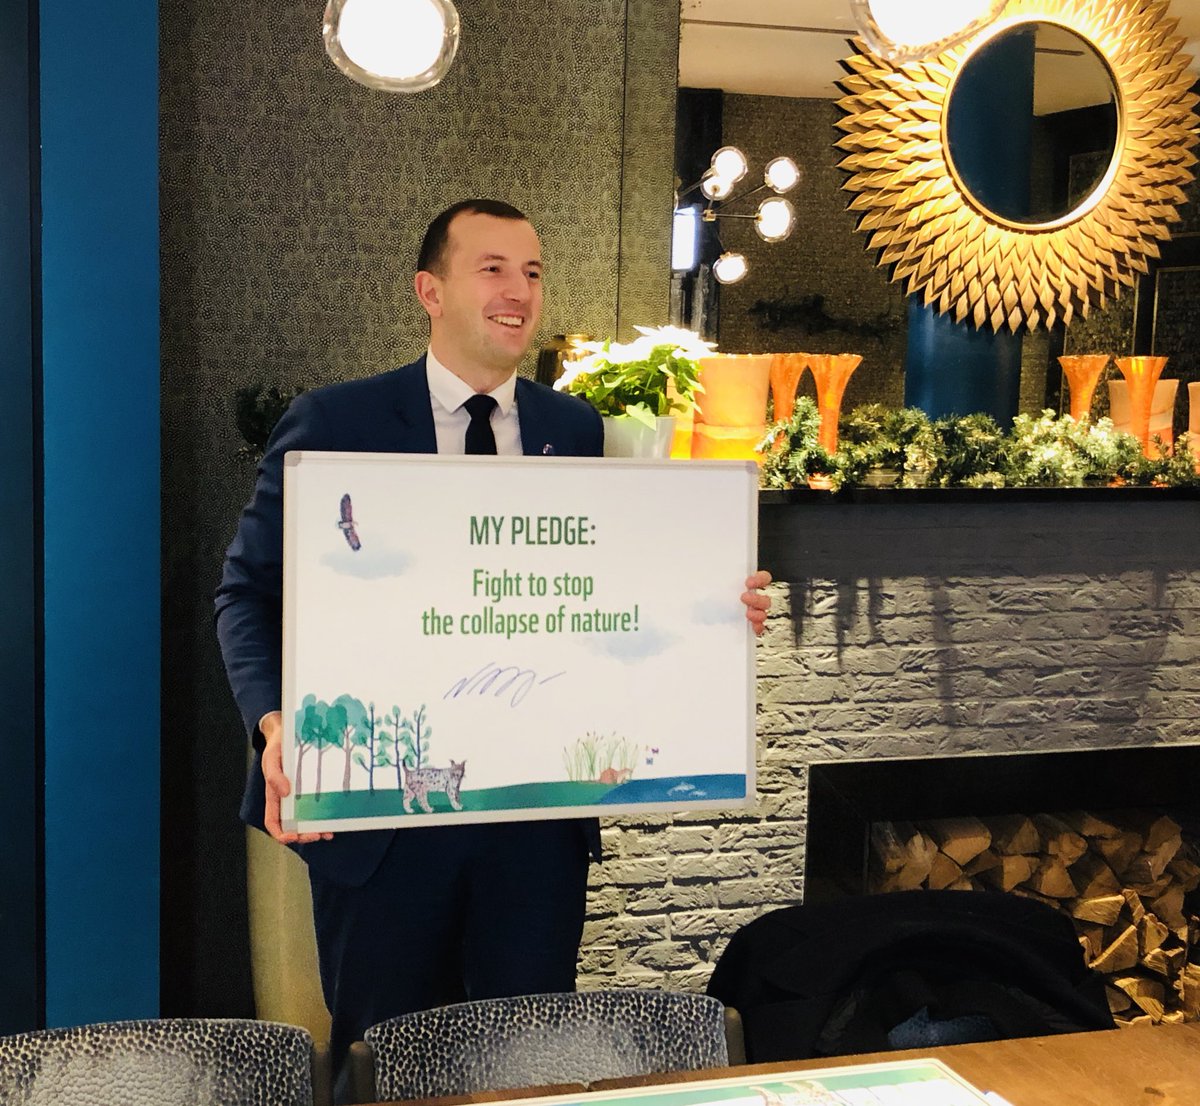 Commissioner @VSinkevicius, thank you for your pledge. We’re counting on you to #BringNatureBack! 🦉👩‍🌾🌳🐝🐟🍃🌍

#EUGreenDeal #BiodiversityCrisis #ClimateCrisis #EU2019FI